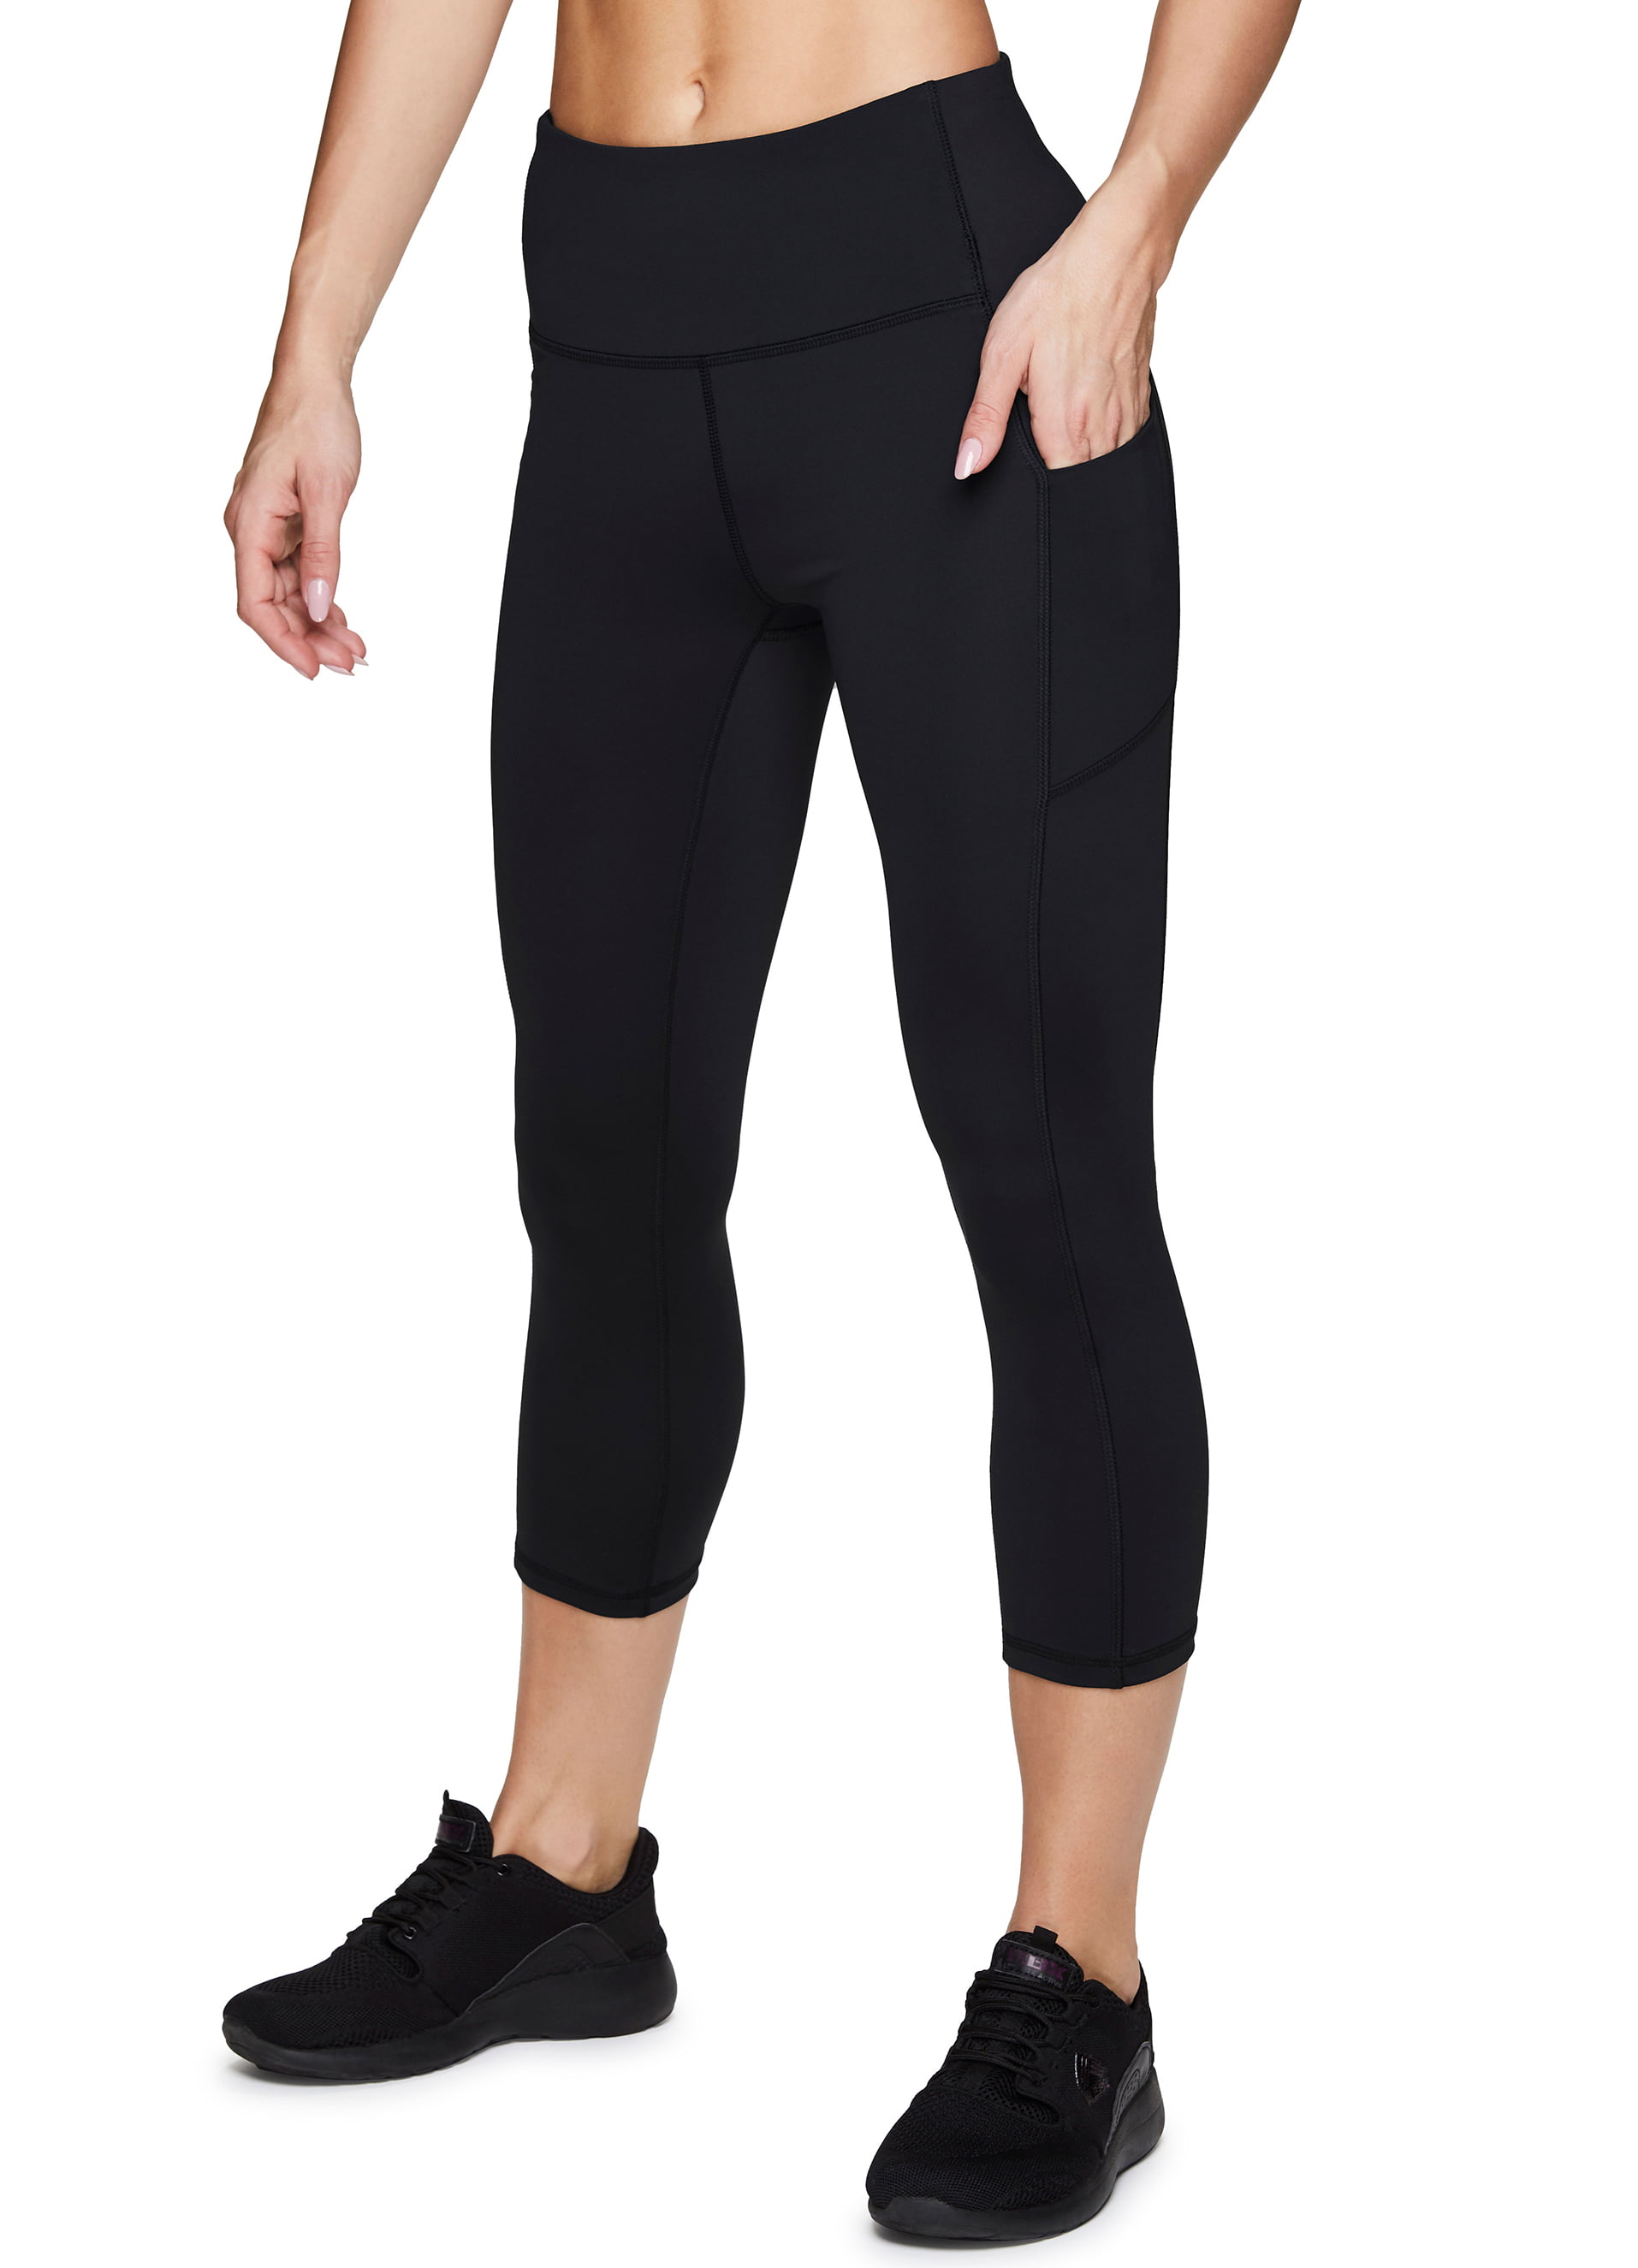 RBX Active Womens Squat Proof High Waist Capri/Ankle/Full Length Workout Running Yoga Leggings with Pockets